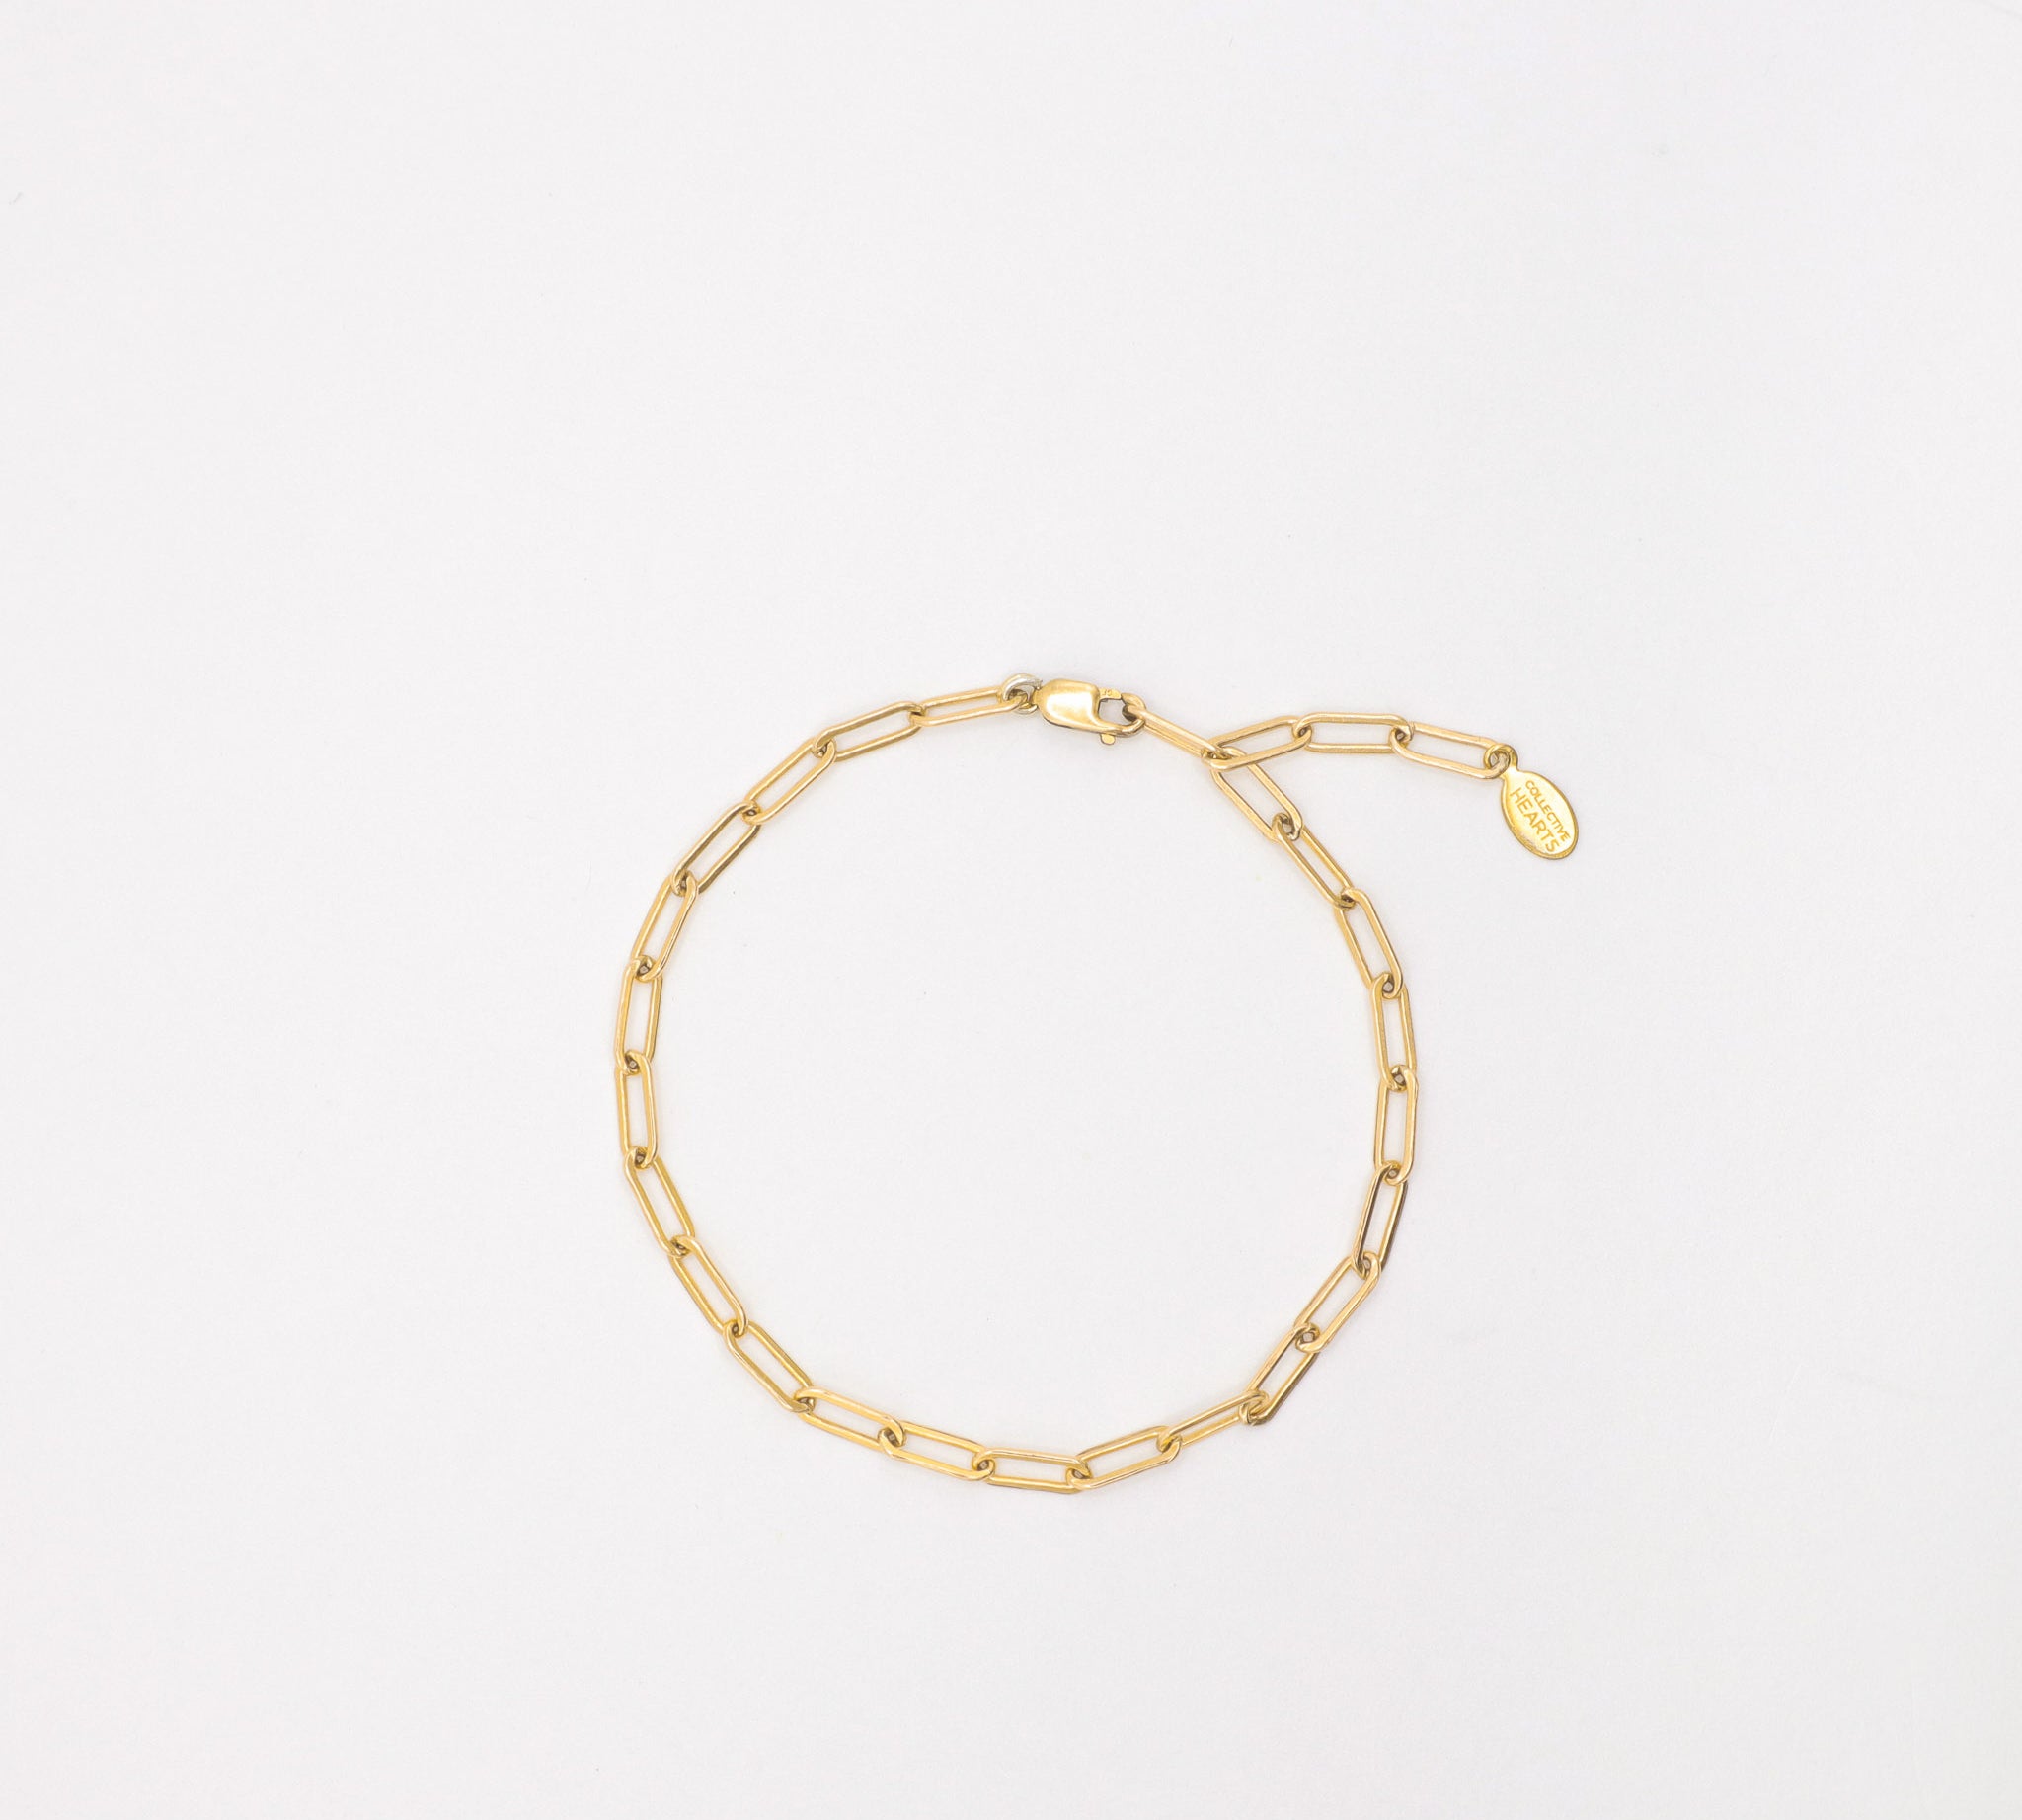 Charming Link Chain Bracelet, featured image